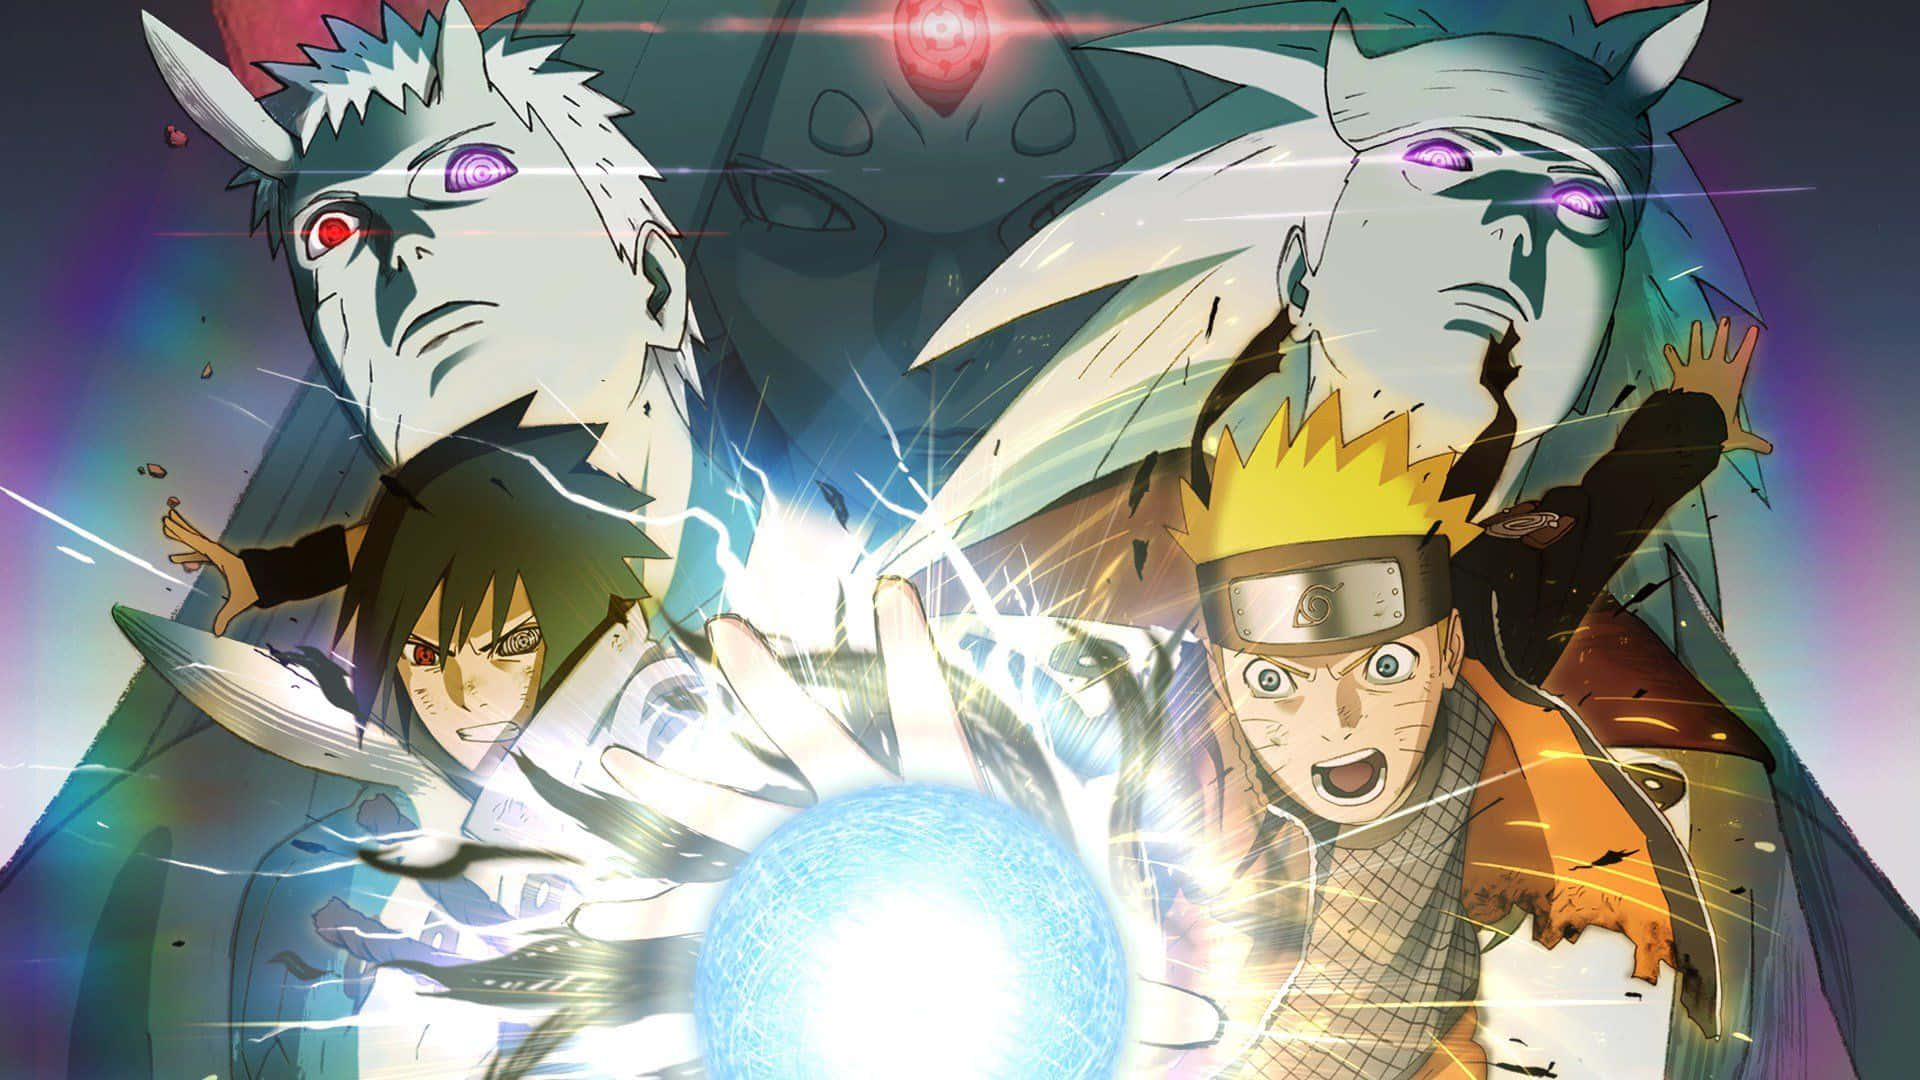 Immerse into the epic world of Naruto with Playstation 4! Wallpaper